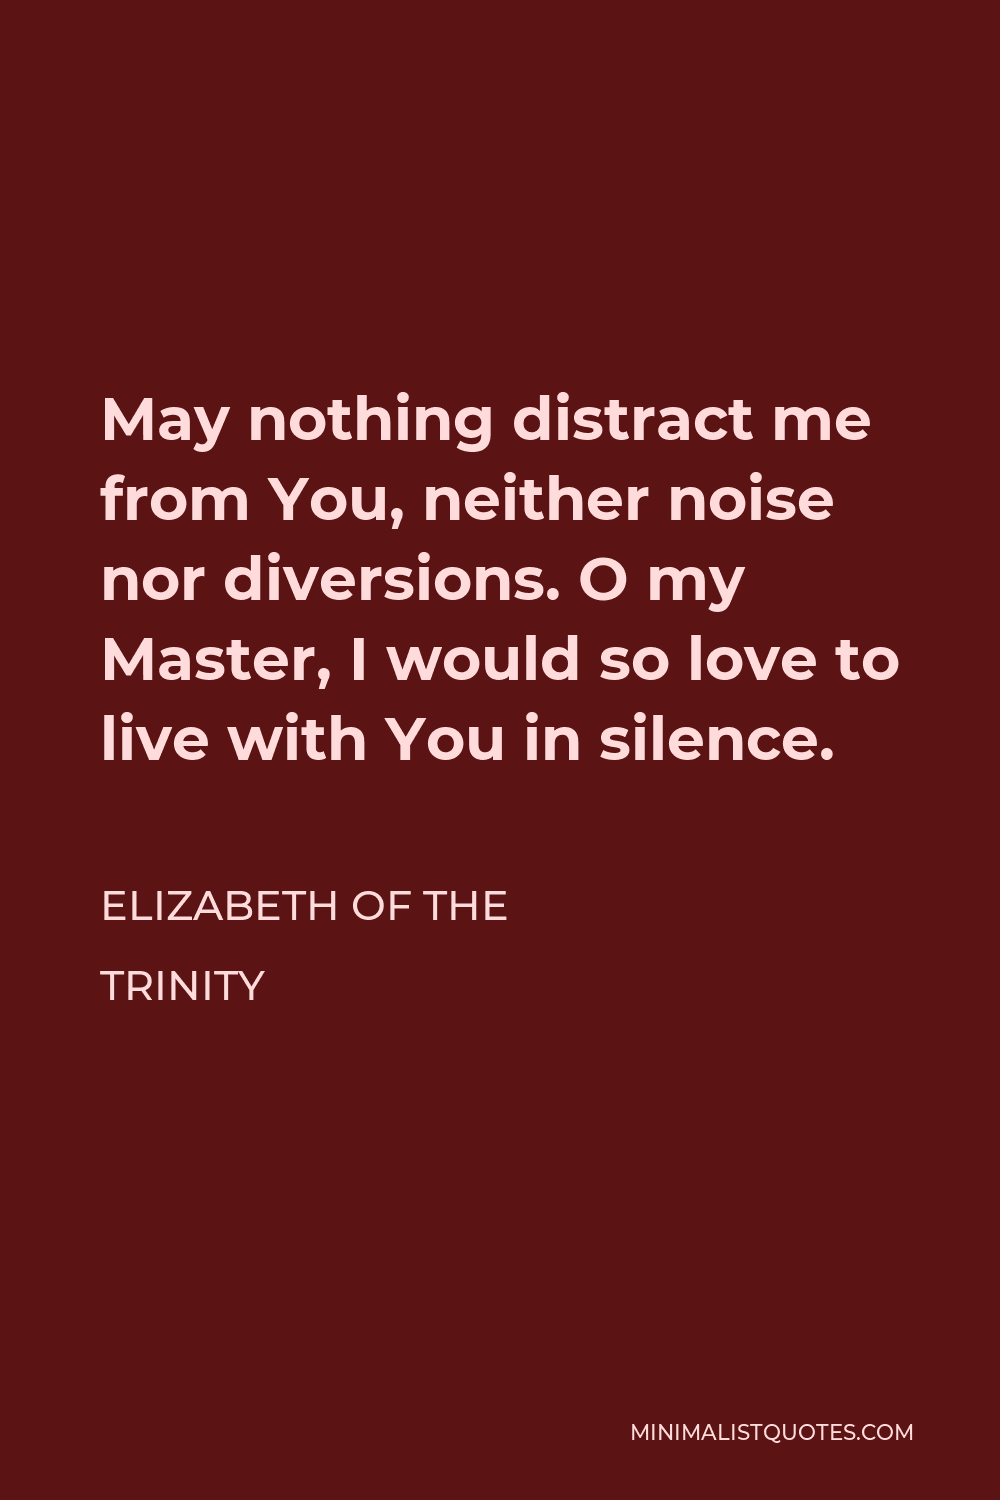 Elizabeth of the Trinity Quote - May nothing distract me from You, neither noise nor diversions. O my Master, I would so love to live with You in silence.